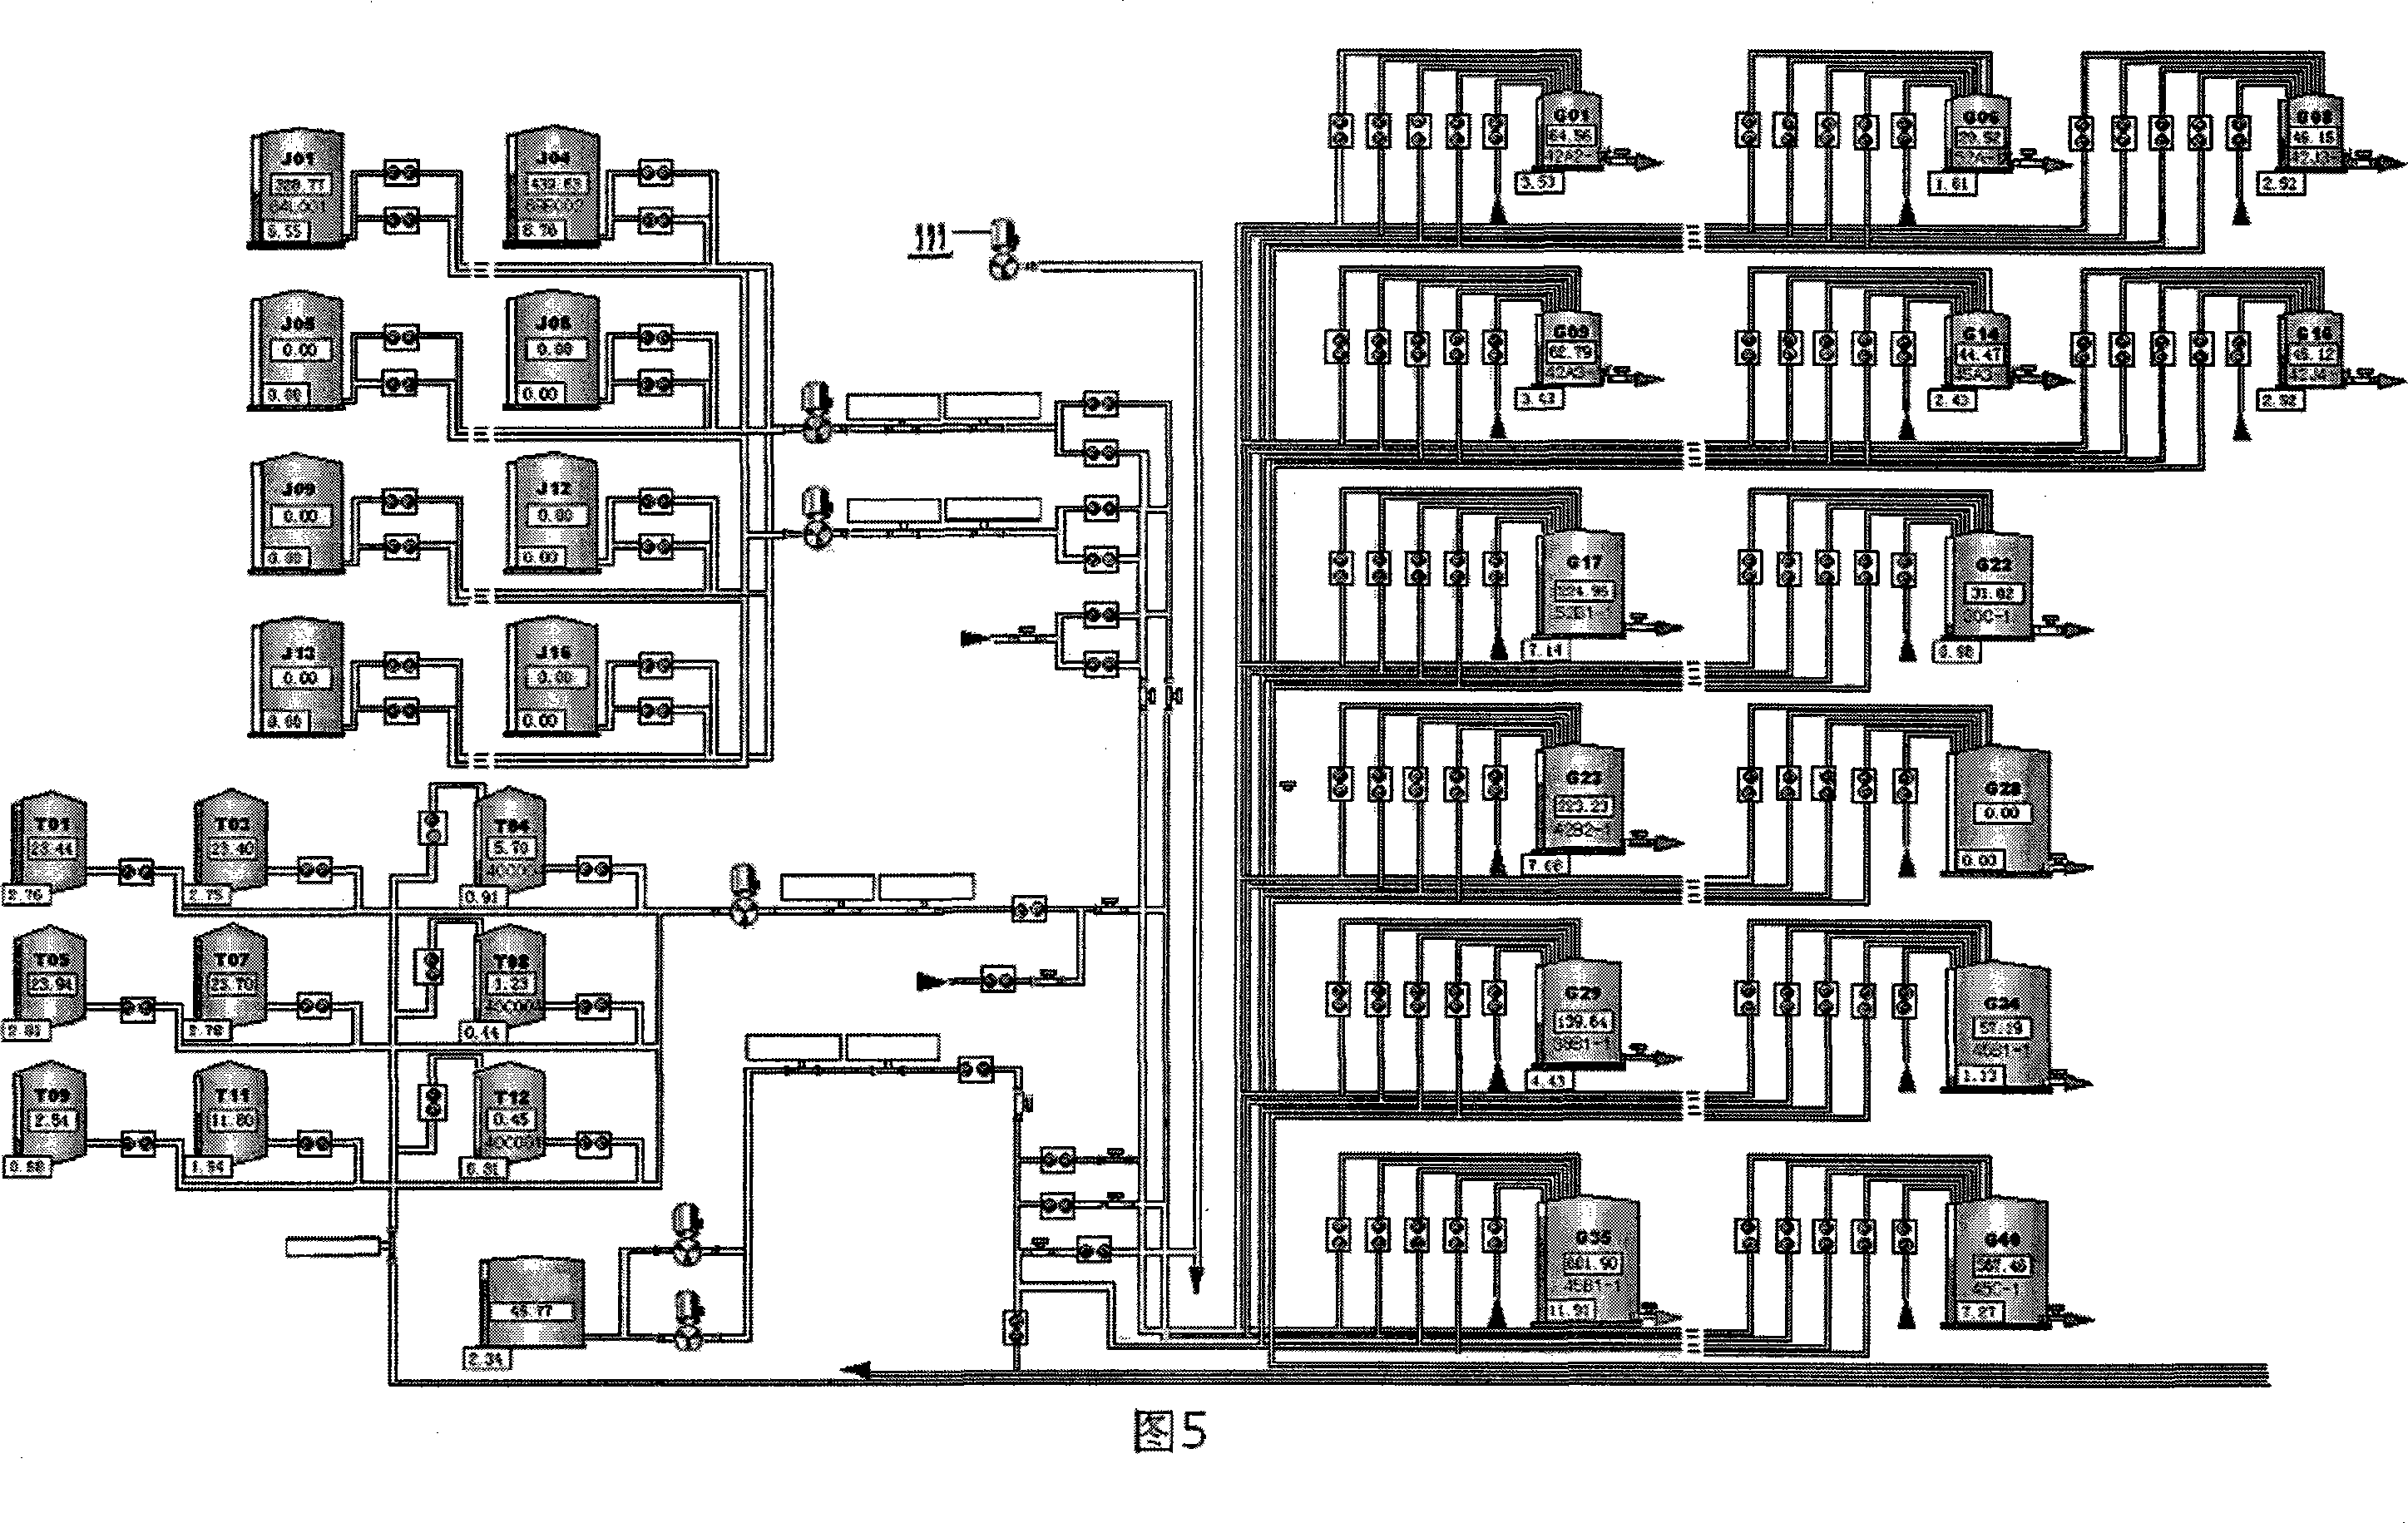 Automatic control system for white spirit blending